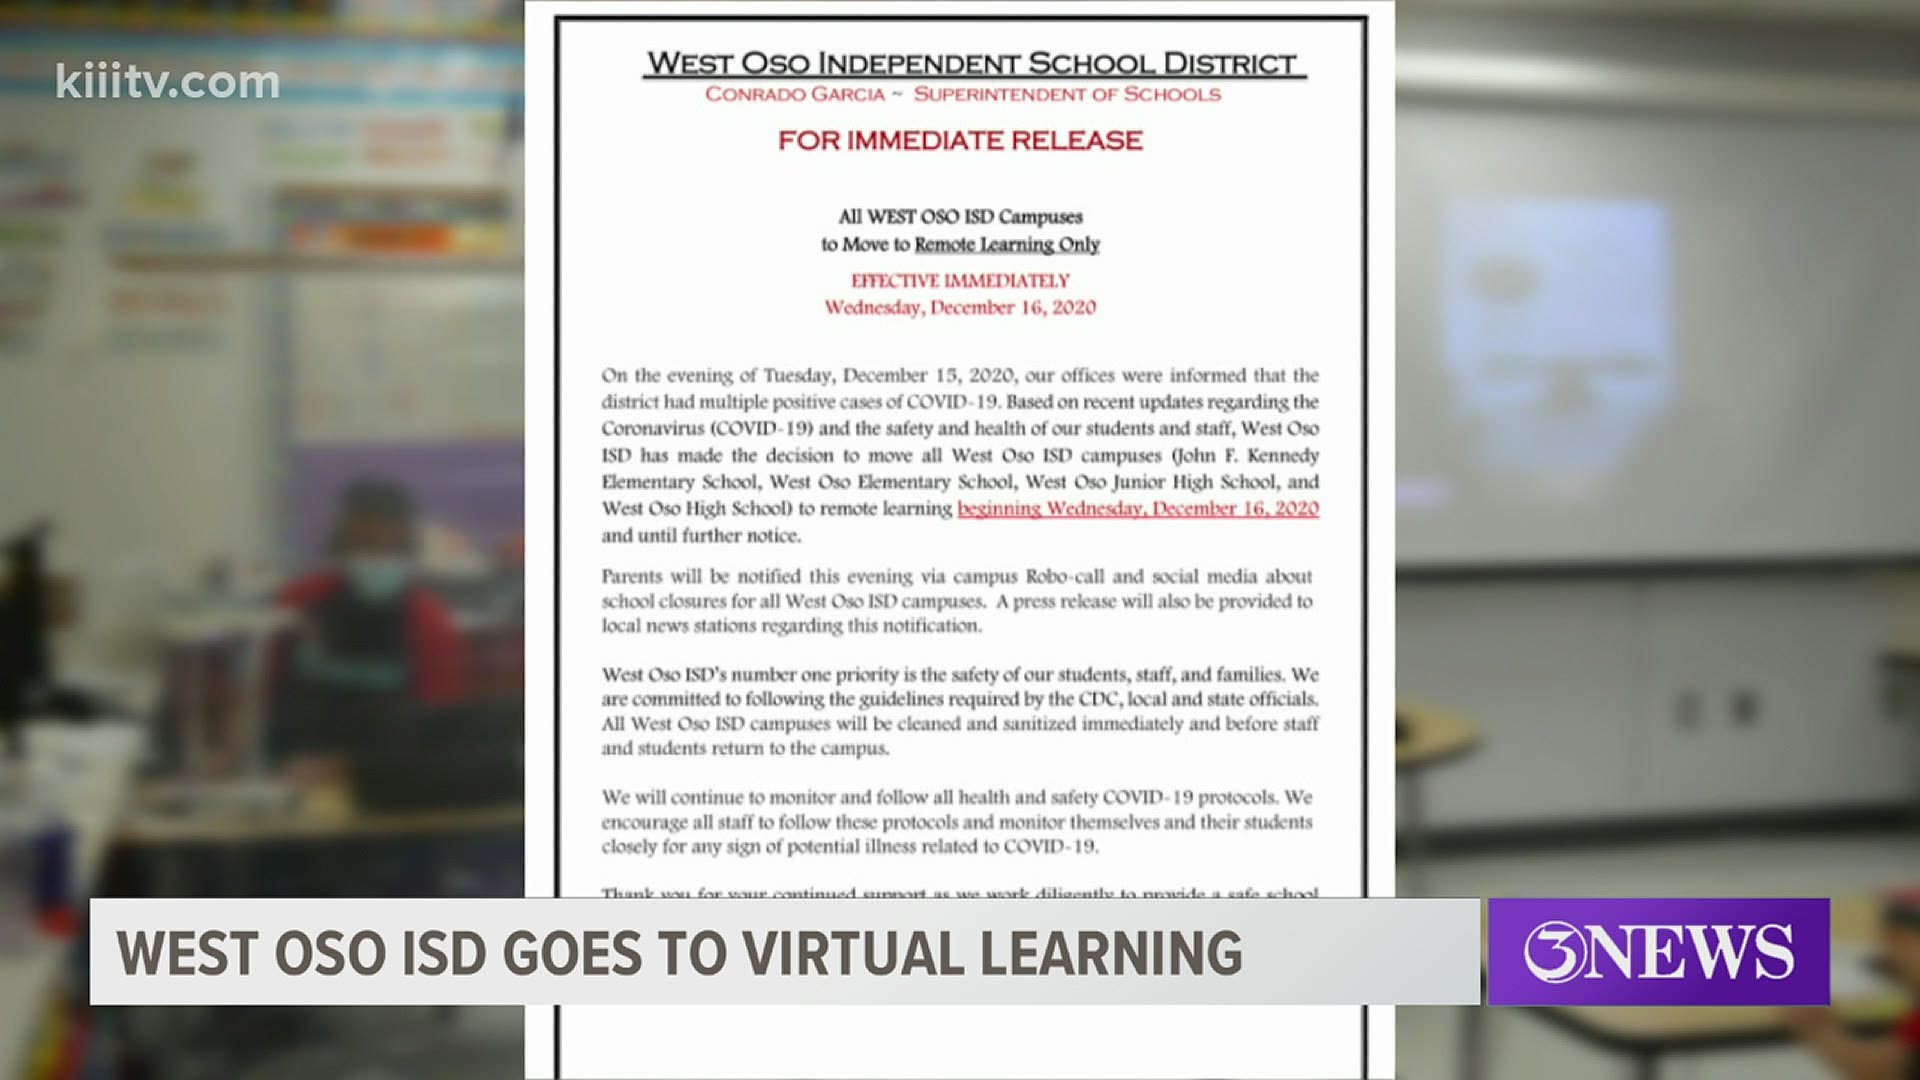 The school district says they are switching to remote learning only effective immediately.